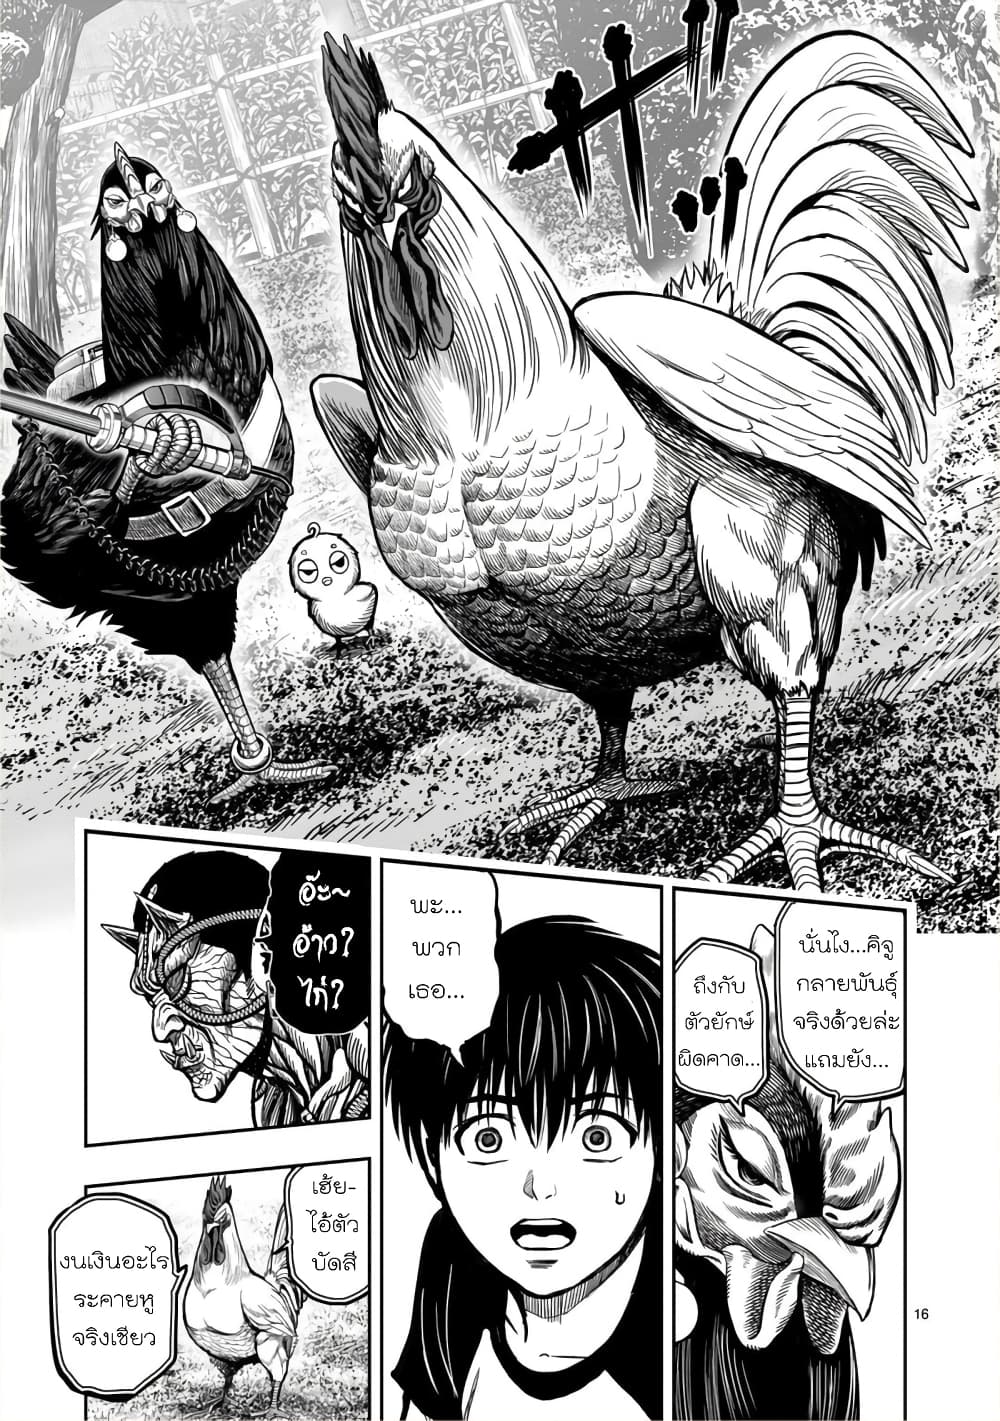 Rooster Fighter 10 (15)